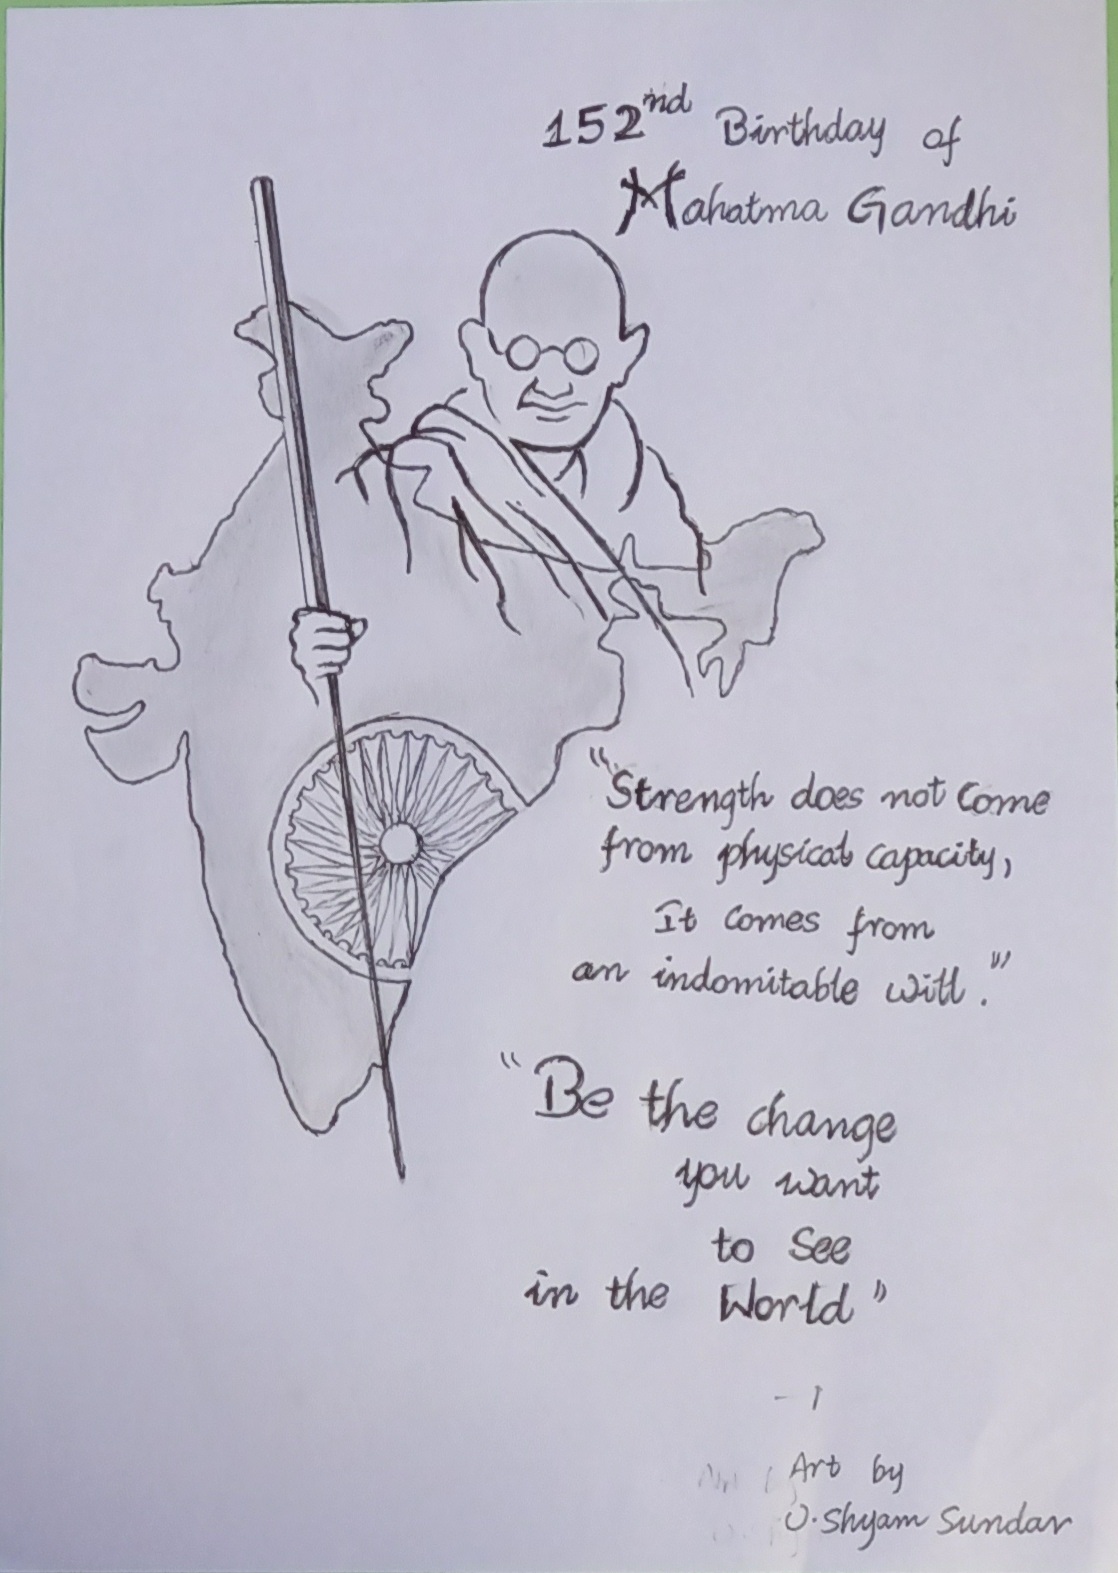 Gandhi sketch Black and White Stock Photos & Images - Alamy